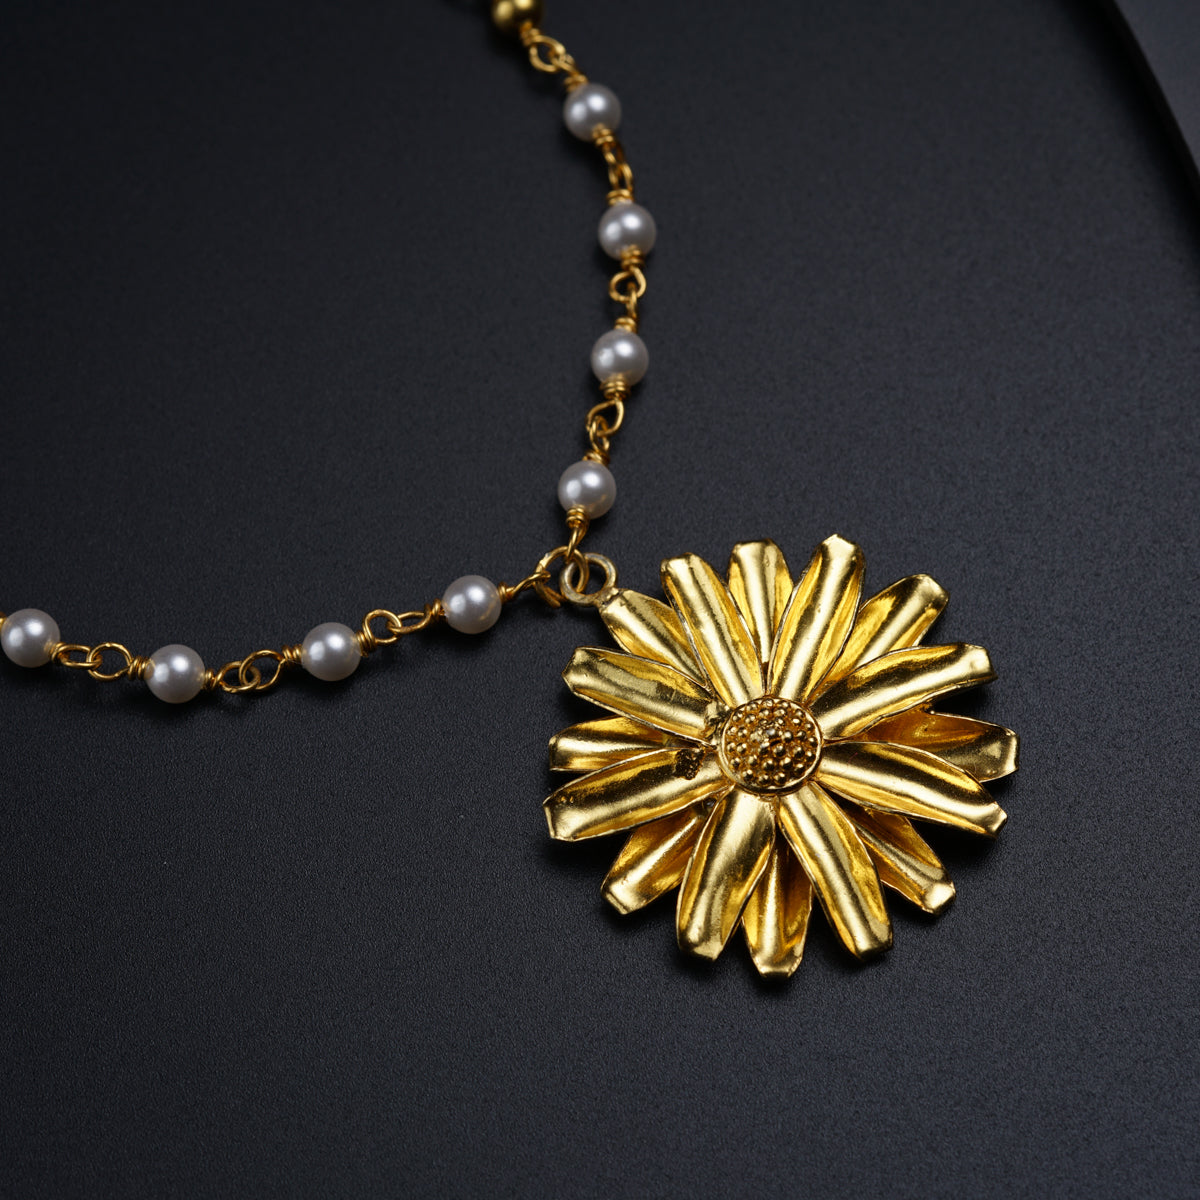 a necklace with a flower and pearls on a black surface